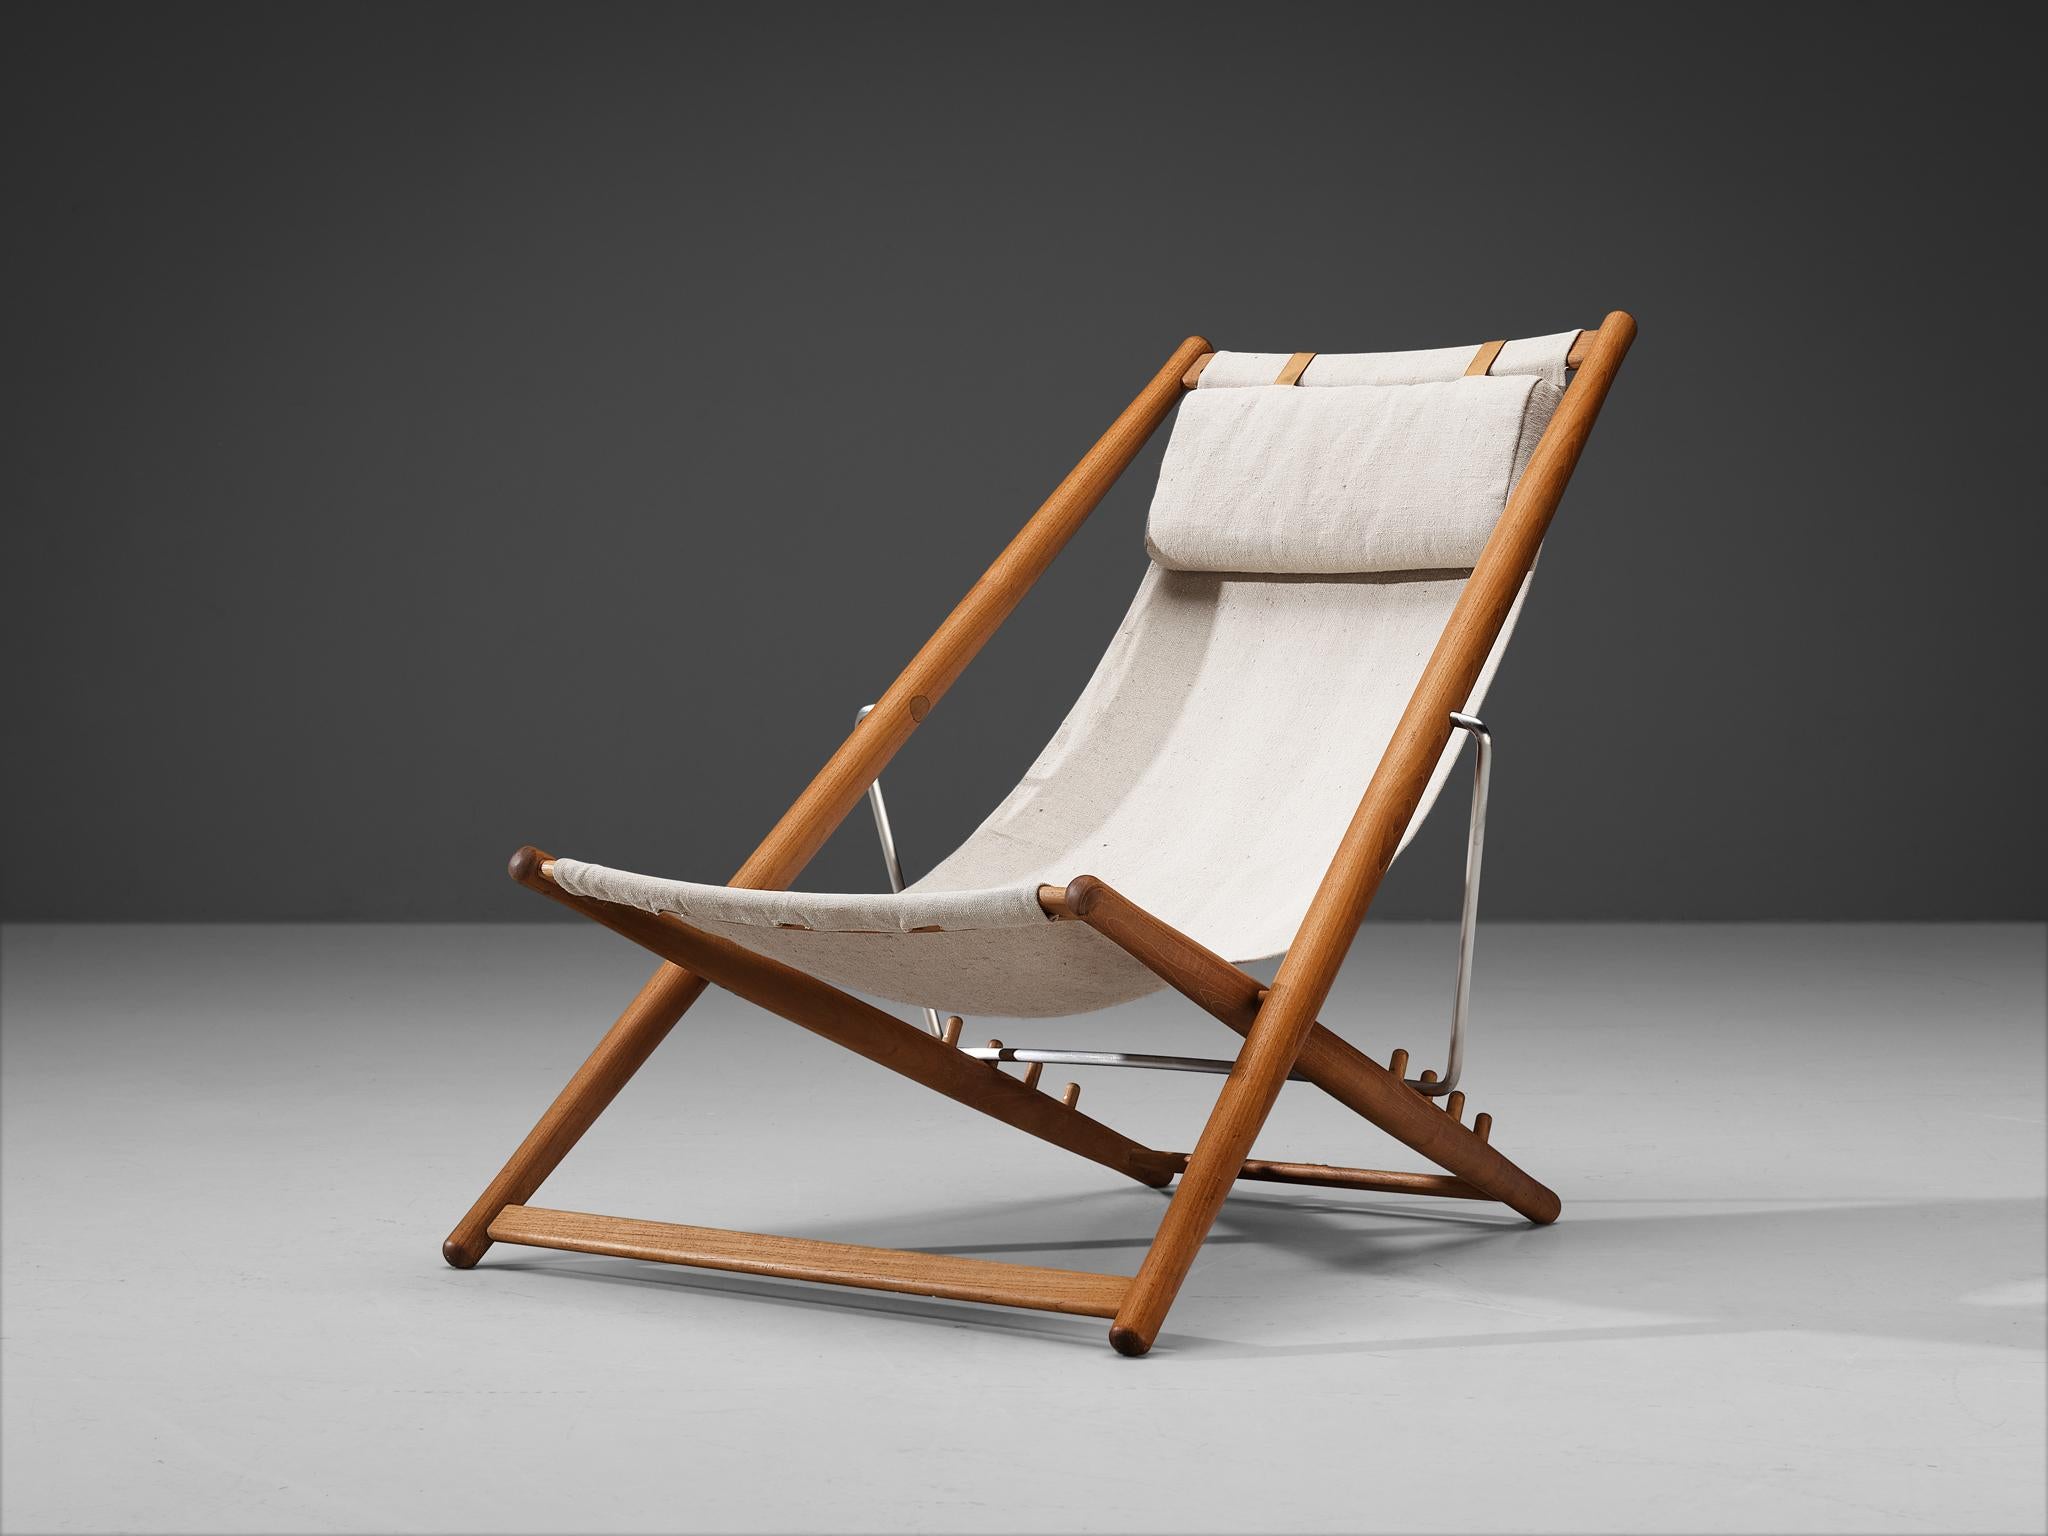 Björn Hulten for Berga Form, lounge chair, model 'H55', teak, fabric, Sweden, 1950s. 

Modest lounge chair designed by Swedish designer Bjorn Hulten in 1955. This 'H55' model was originally designed to use both indoors as outdoors. The teak wooden